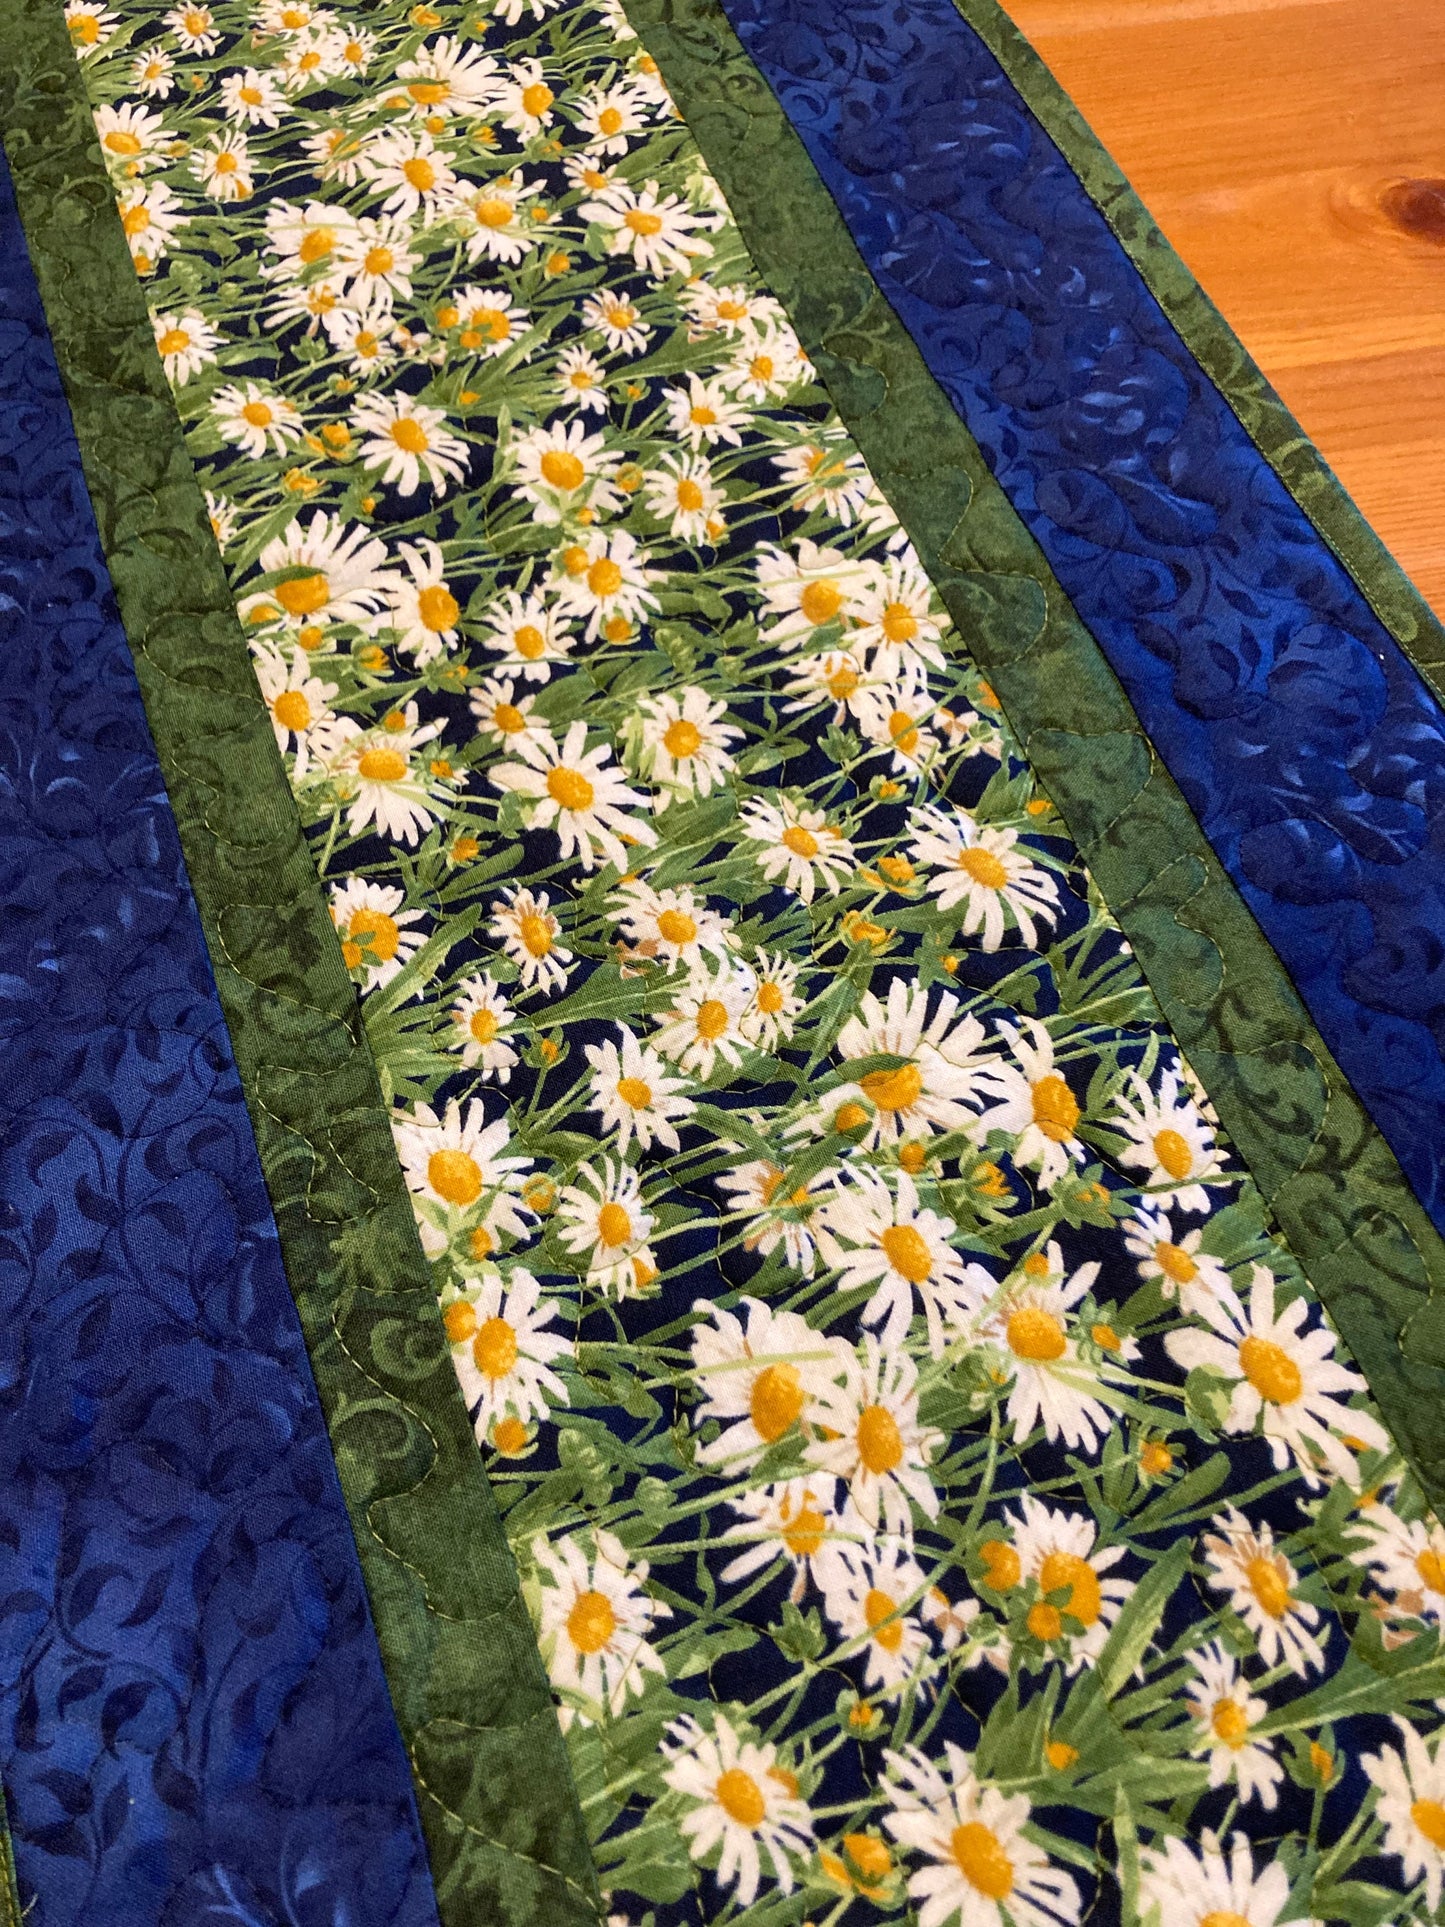 White Daisies Wildflower Quilted Table Runner+ Topper, Dining Room Coffee Table Reversible 13x48" Summer Runner End Table, Garden Everyday